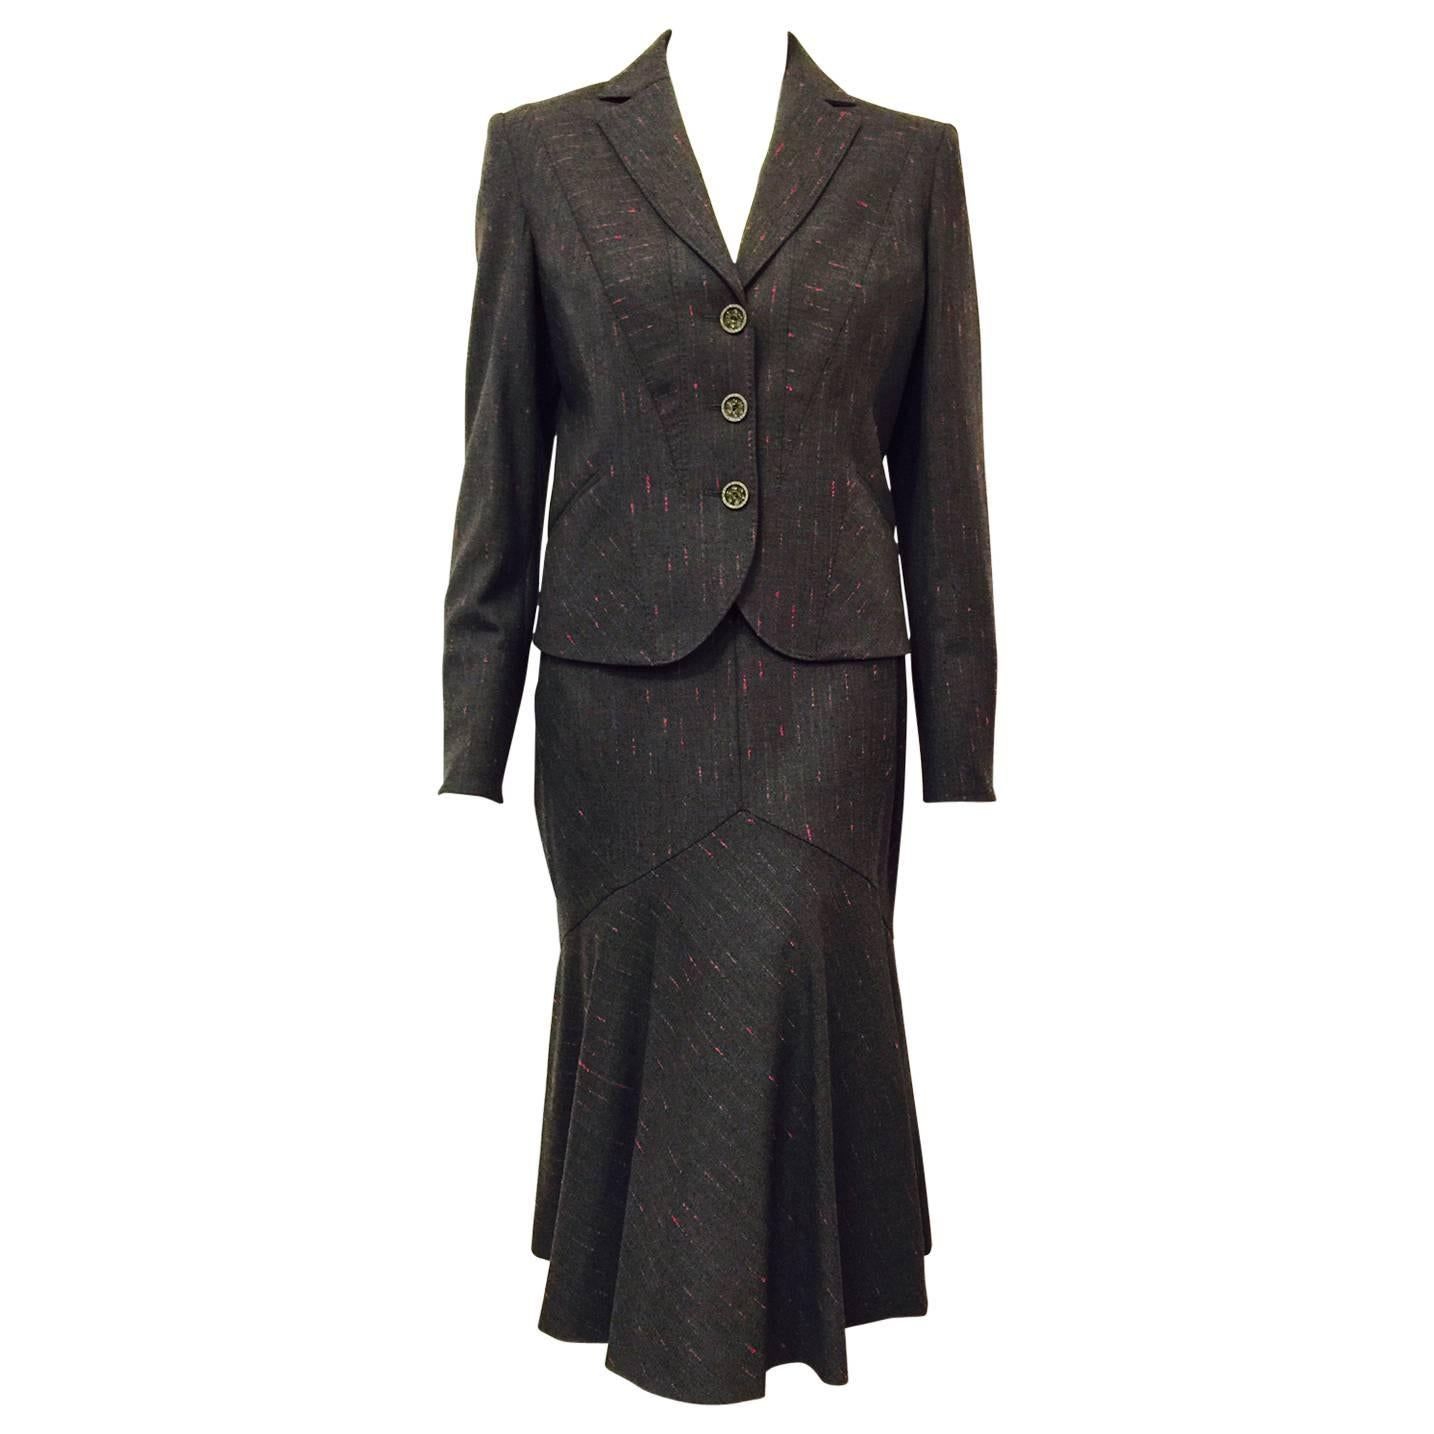 Luxurious Les Copains Charcoal Wool Skirt Suit With Fuchsia Stripes  For Sale